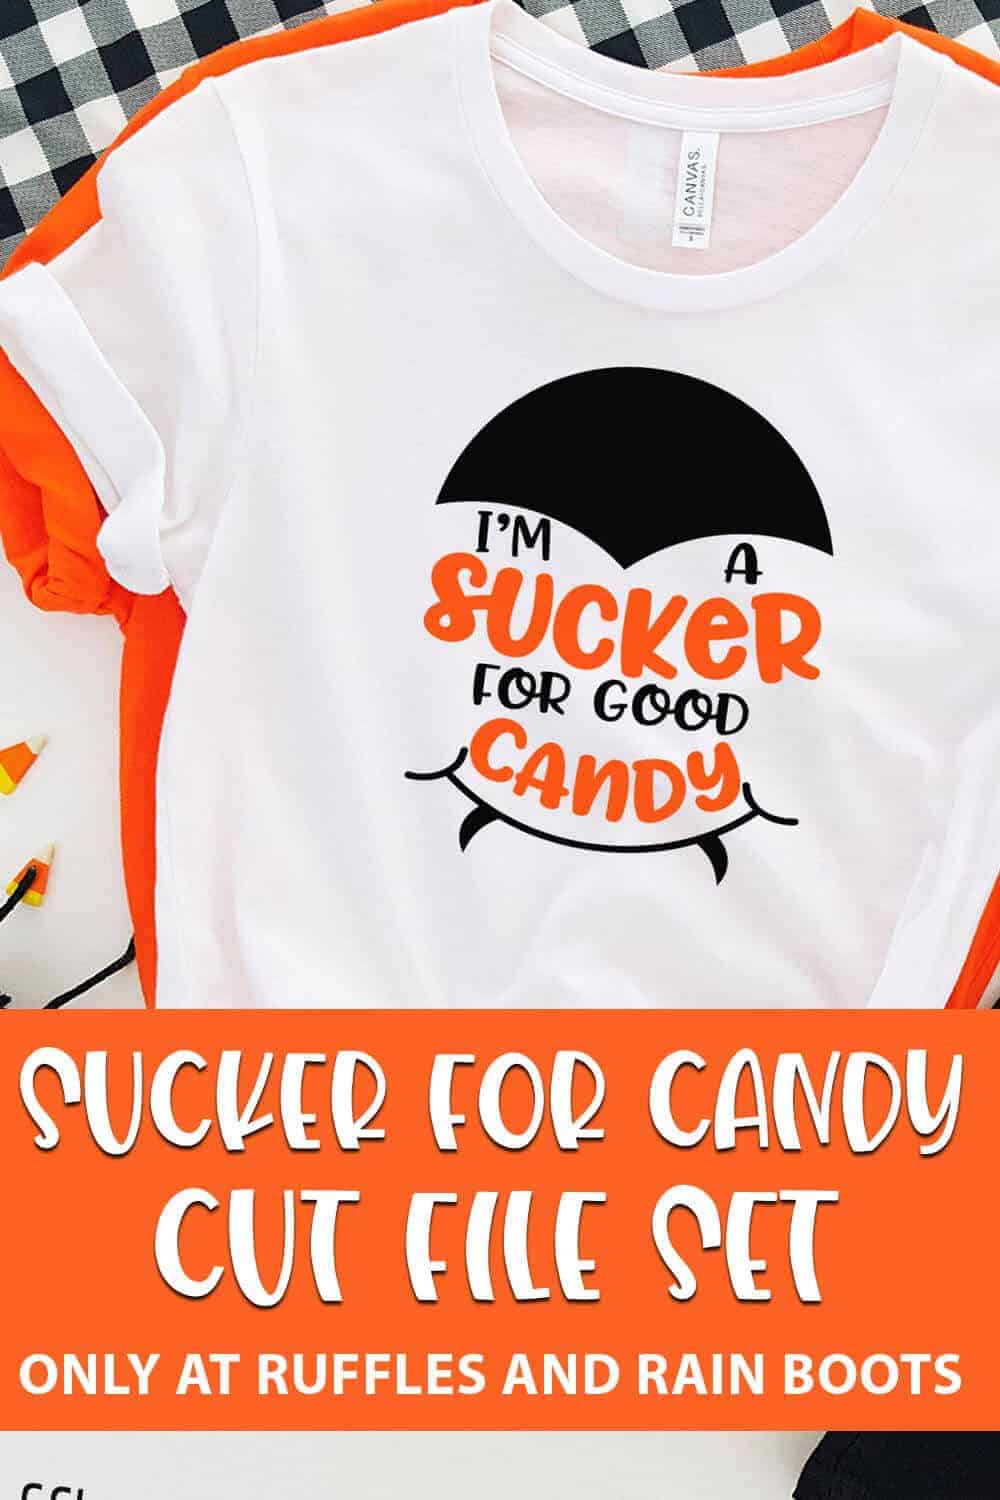 Sucker for Candy halloween cut file set for cricut or silhouette with text which reads sucker for candy cut file set